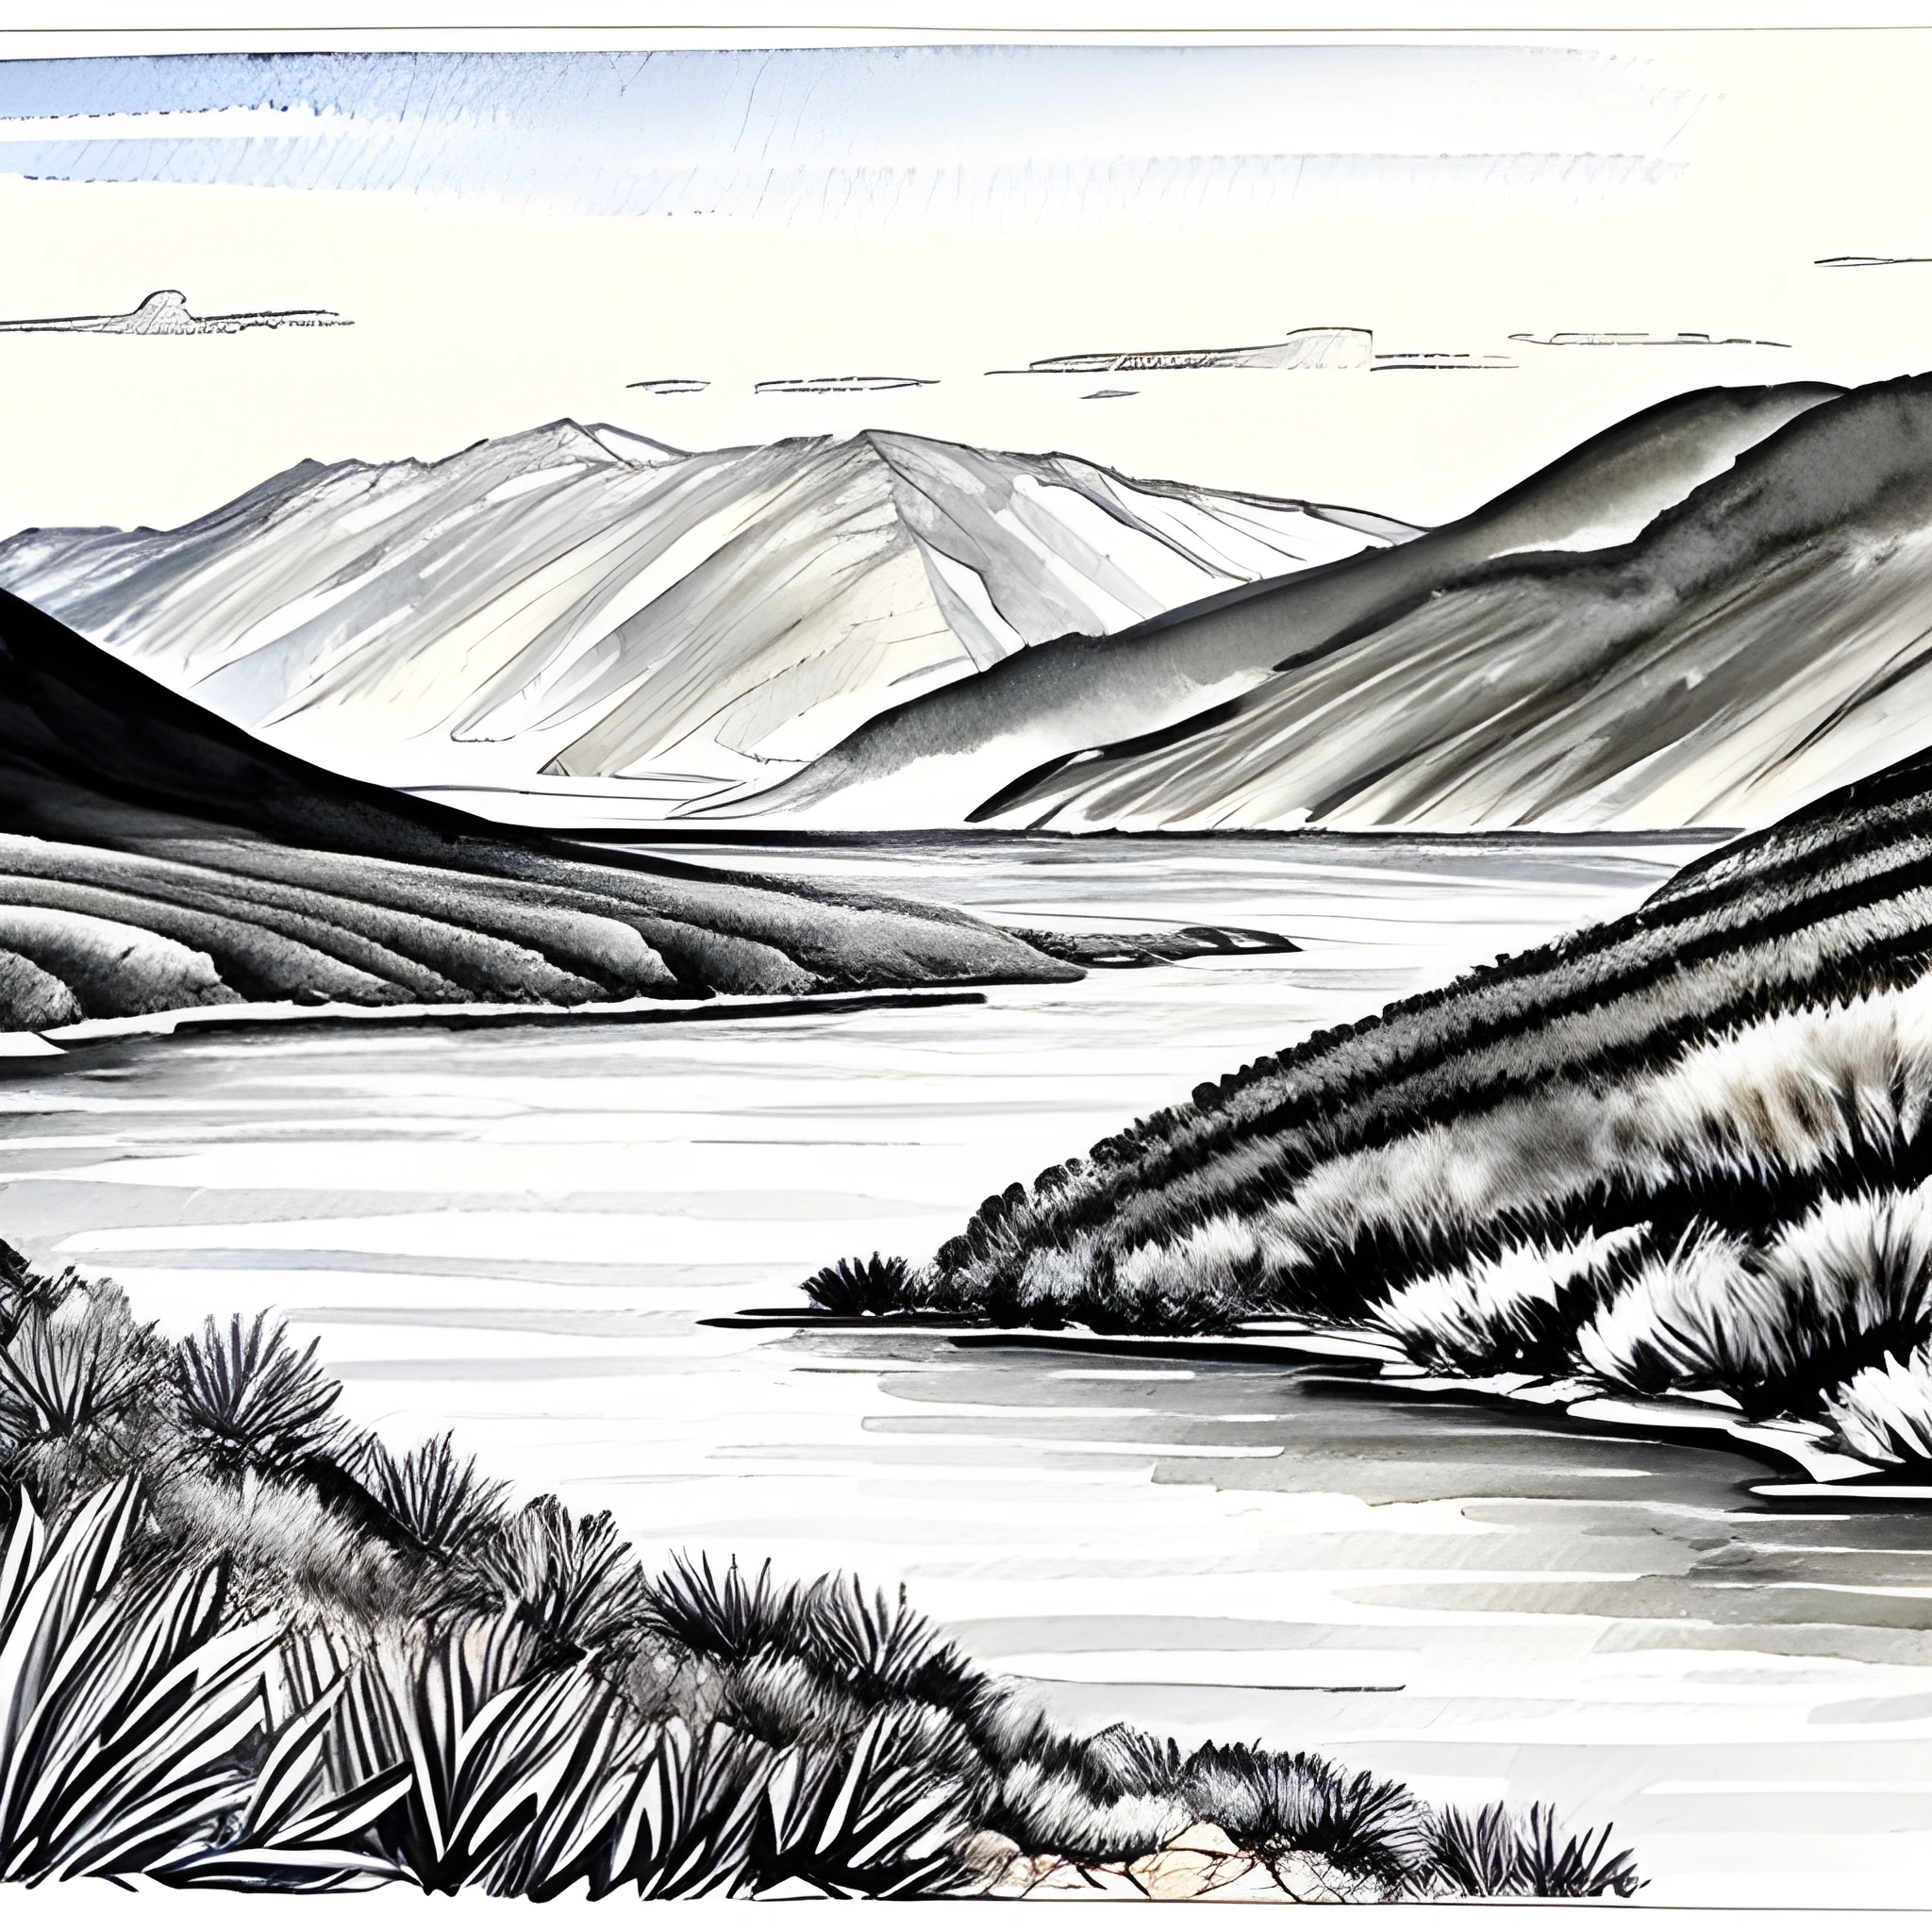 a drawing of a mountain landscape with a lake